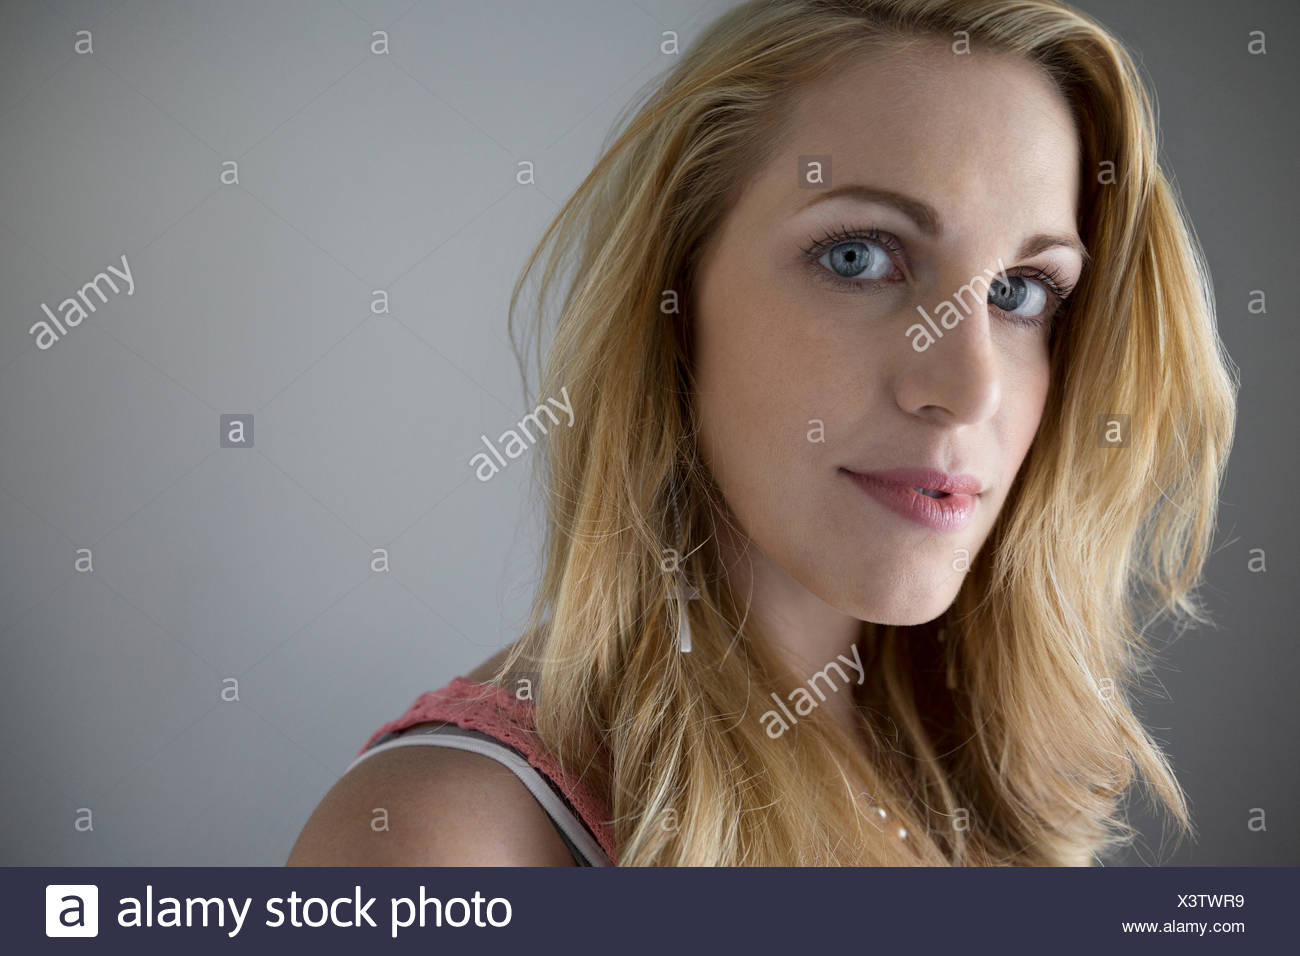 Woman With Blonde Hair And Blue Eyes A Swedish American In